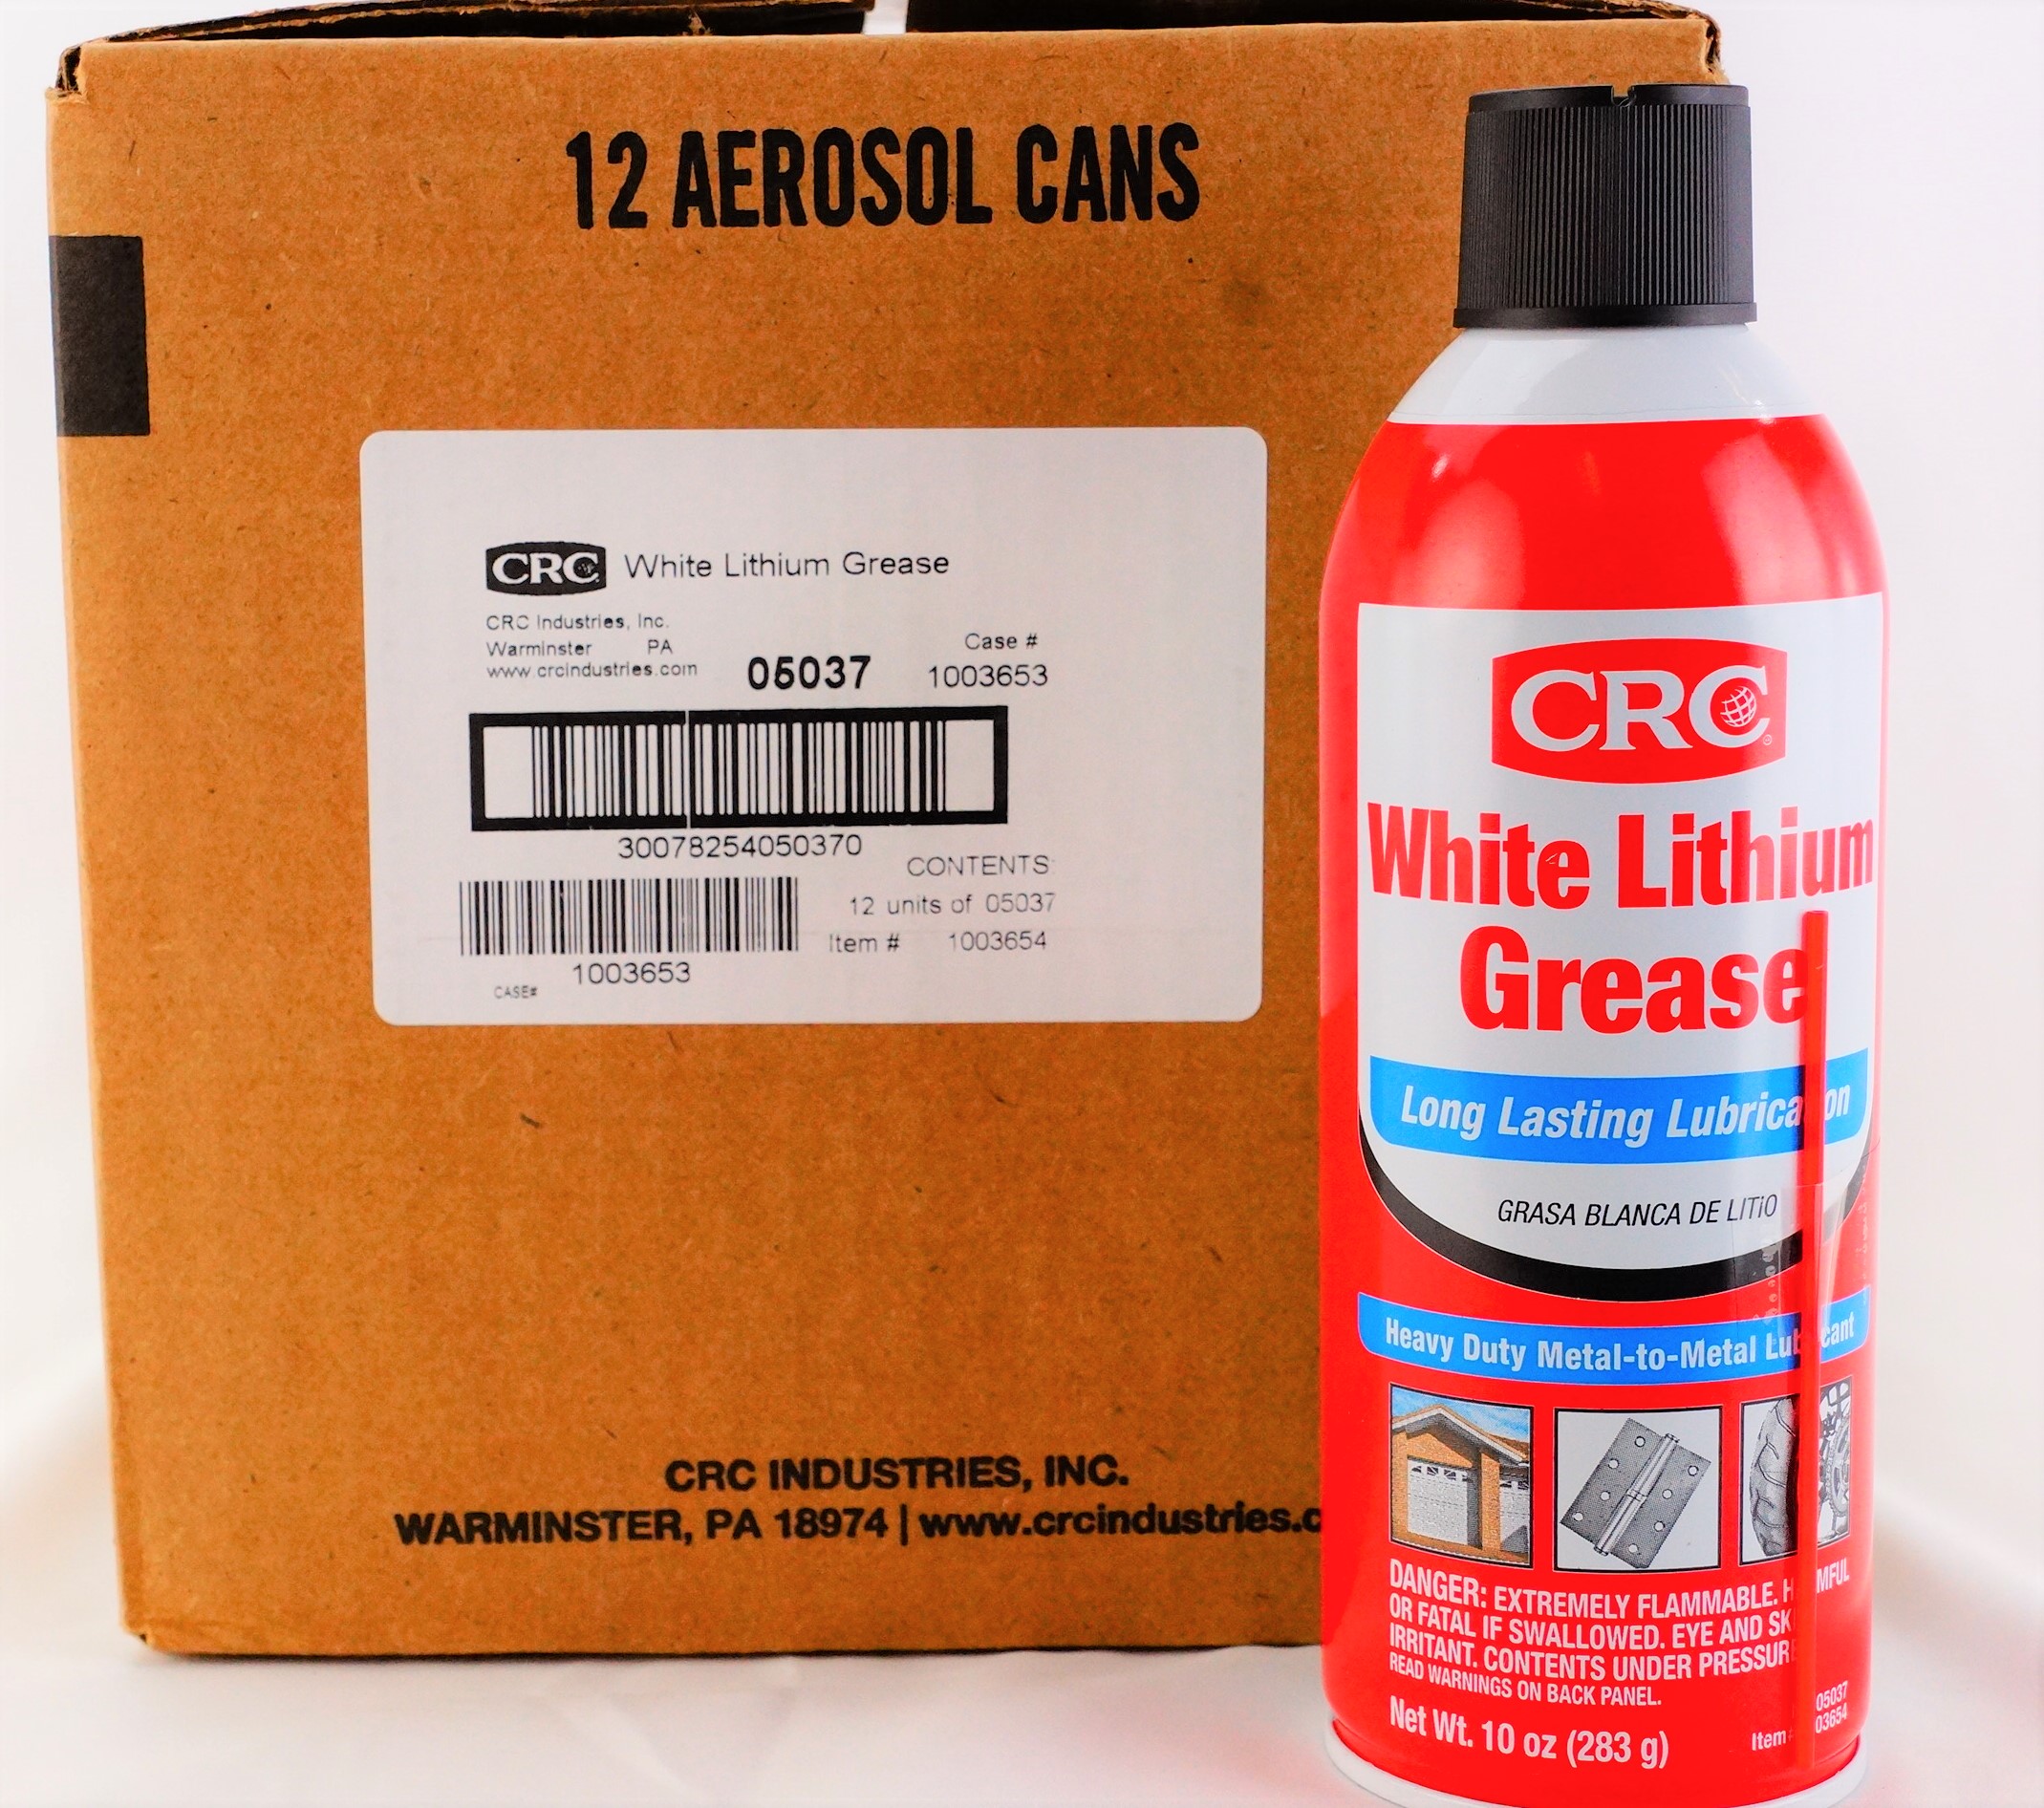 Case of 12 Genuine 05078 CRC Throttle Body Cleaner Cleans Air Intake